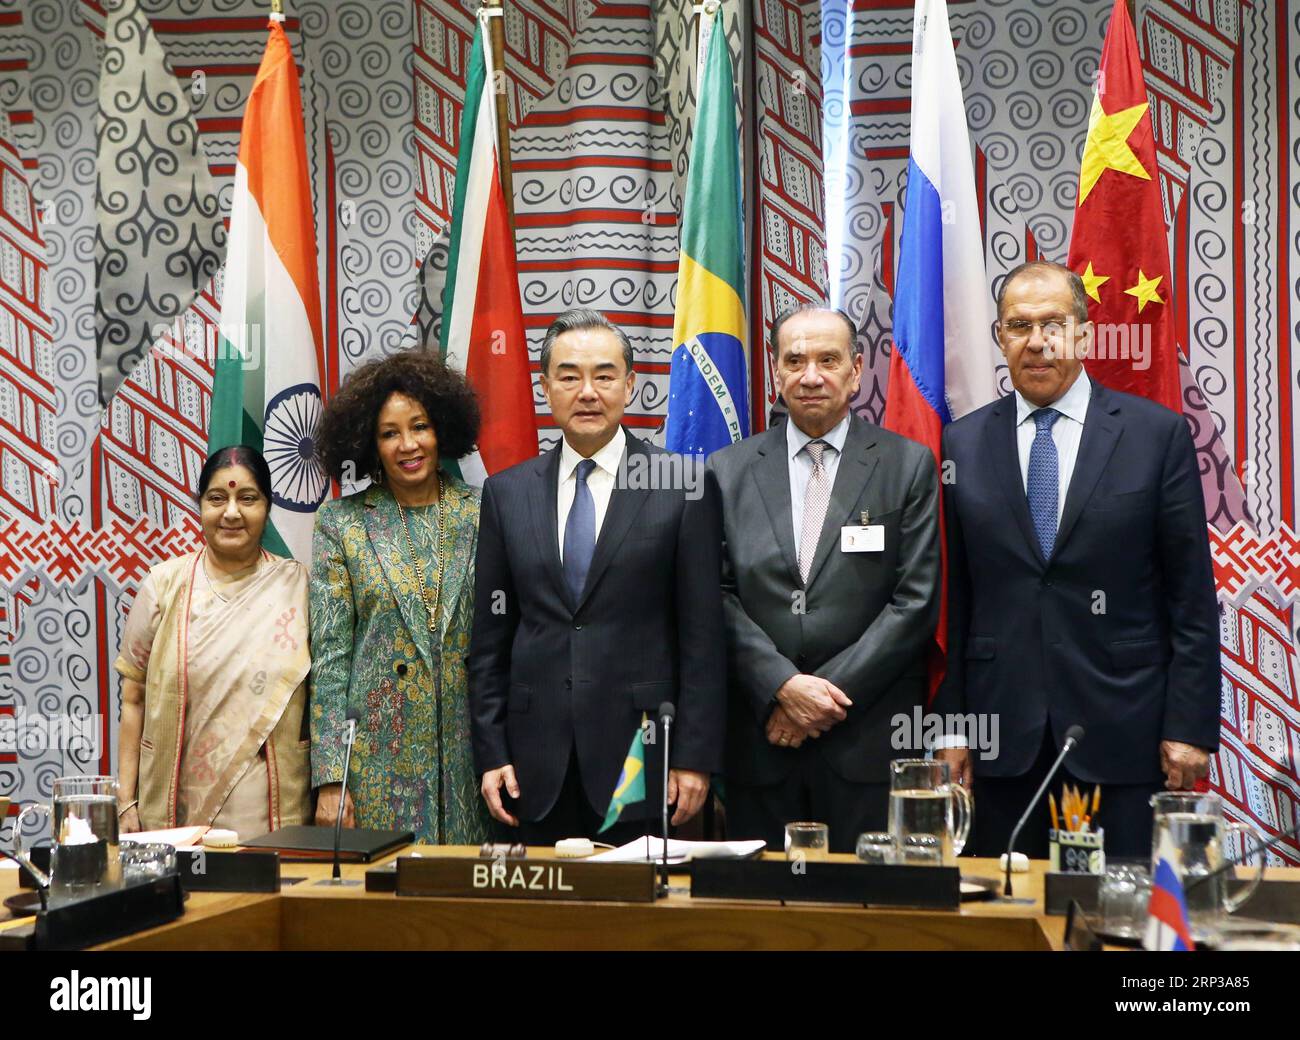 News Bilder des Tages (180928) -- UNITED NATIONS, Sep. 28, 2018 -- Chinese State Councilor and Foreign Minister Wang Yi (C) poses for a group photo with Indian External Affairs Minister Sushma Swaraj (1st L), South African Minister of International Relations and Cooperation Lindiwe Sisulu (2nd L), Brazilian Foreign Minister Aloysio Nunes (2nd R) and Russian Foreign Minister Sergey Lavrov before their meeting at the UN headquarters in New York, on Sept. 27, 2018. Foreign ministers of Brazil, Russia, India, China and South Africa (BRICS) vowed on Thursday to uphold multilateralism, safeguard int Stock Photo